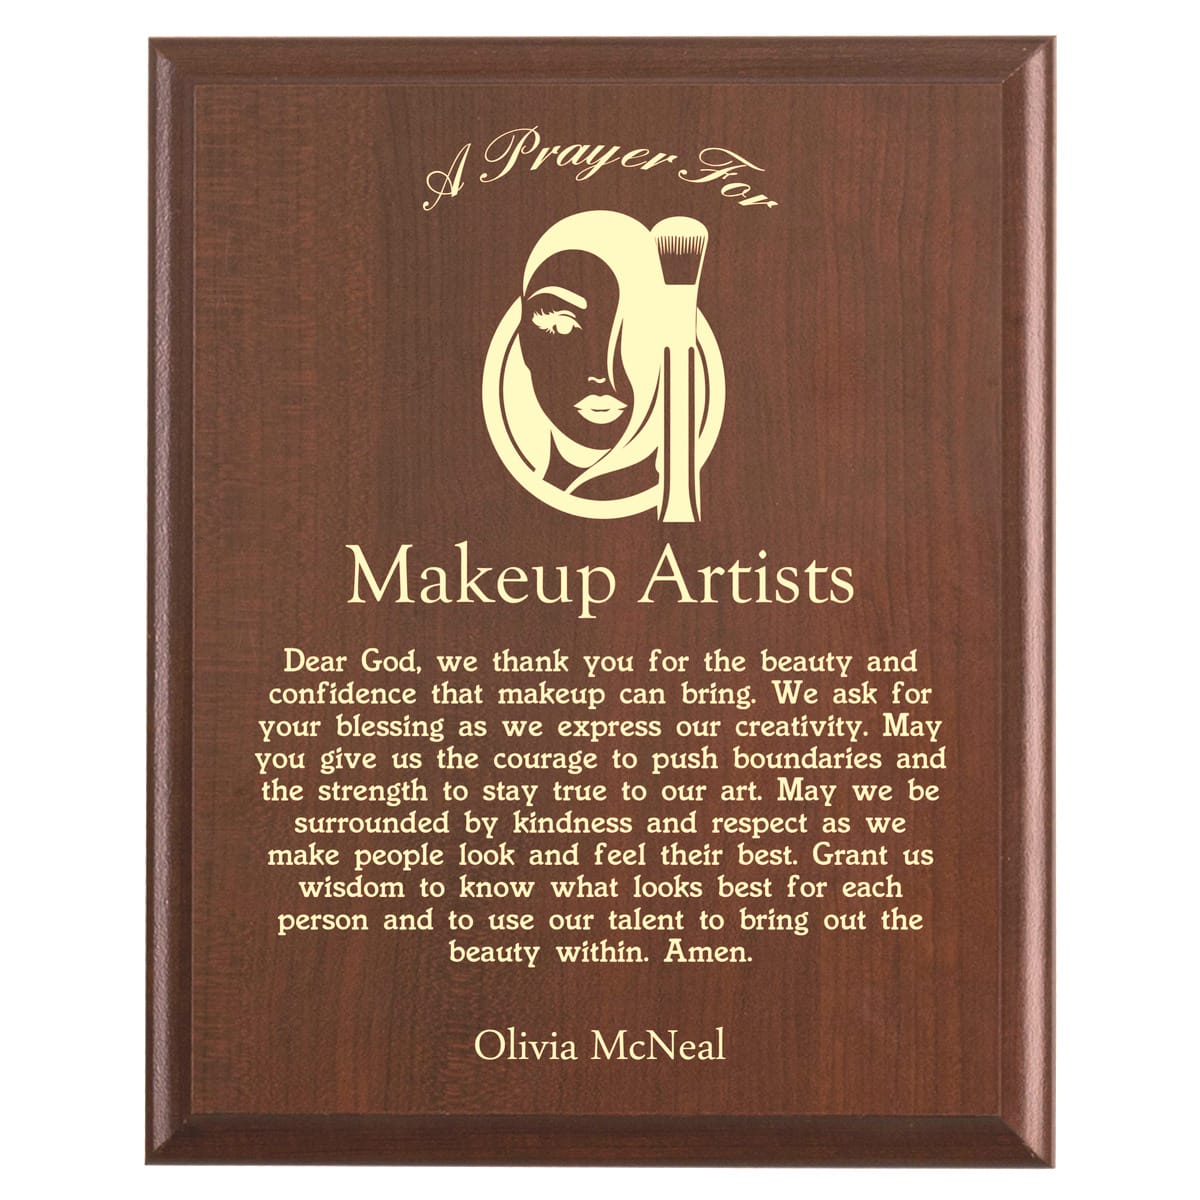 Plaque photo: Makeup Artist Prayer Plaque design with free personalization. Wood style finish with customized text.